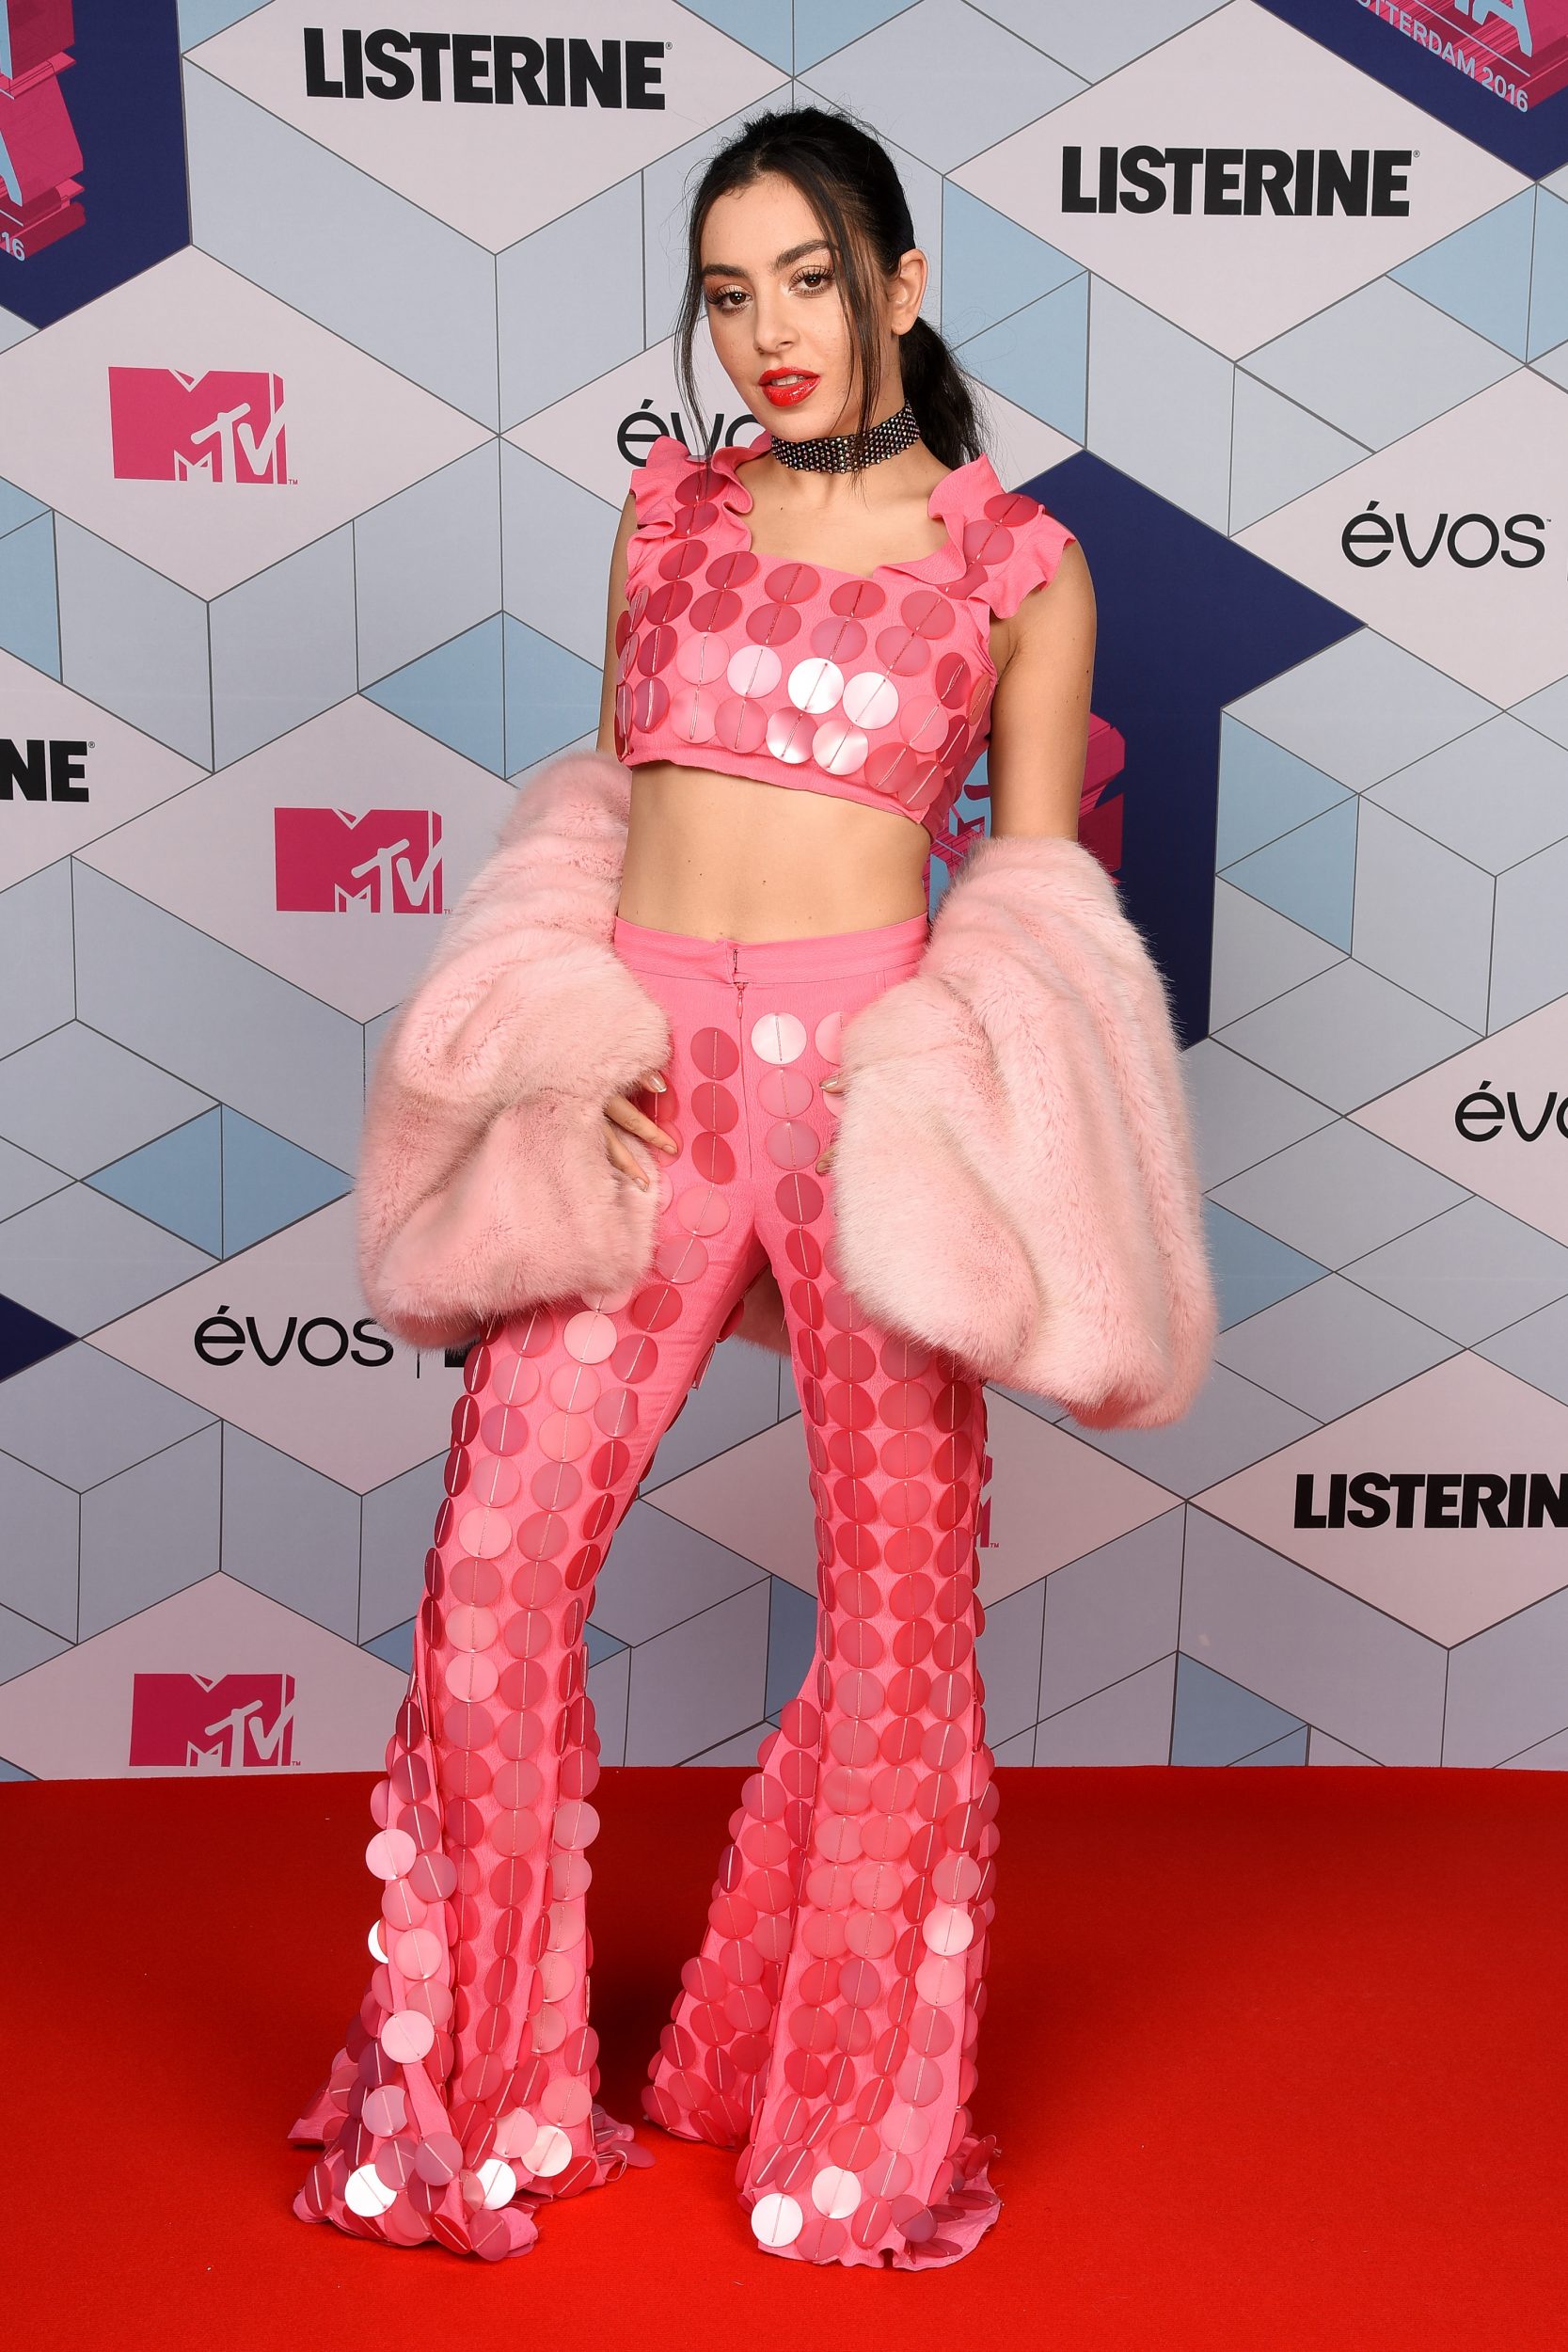 ROTTERDAM, NETHERLANDS - NOVEMBER 06: (EXCLUSIVE COVERAGE) Charli XCX attends the MTV Europe Music Awards 2016 on November 6, 2016 in Rotterdam, Netherlands. (Photo by Dave Hogan/MTV 2016/Getty Images) *** Local Caption *** Charli XCX